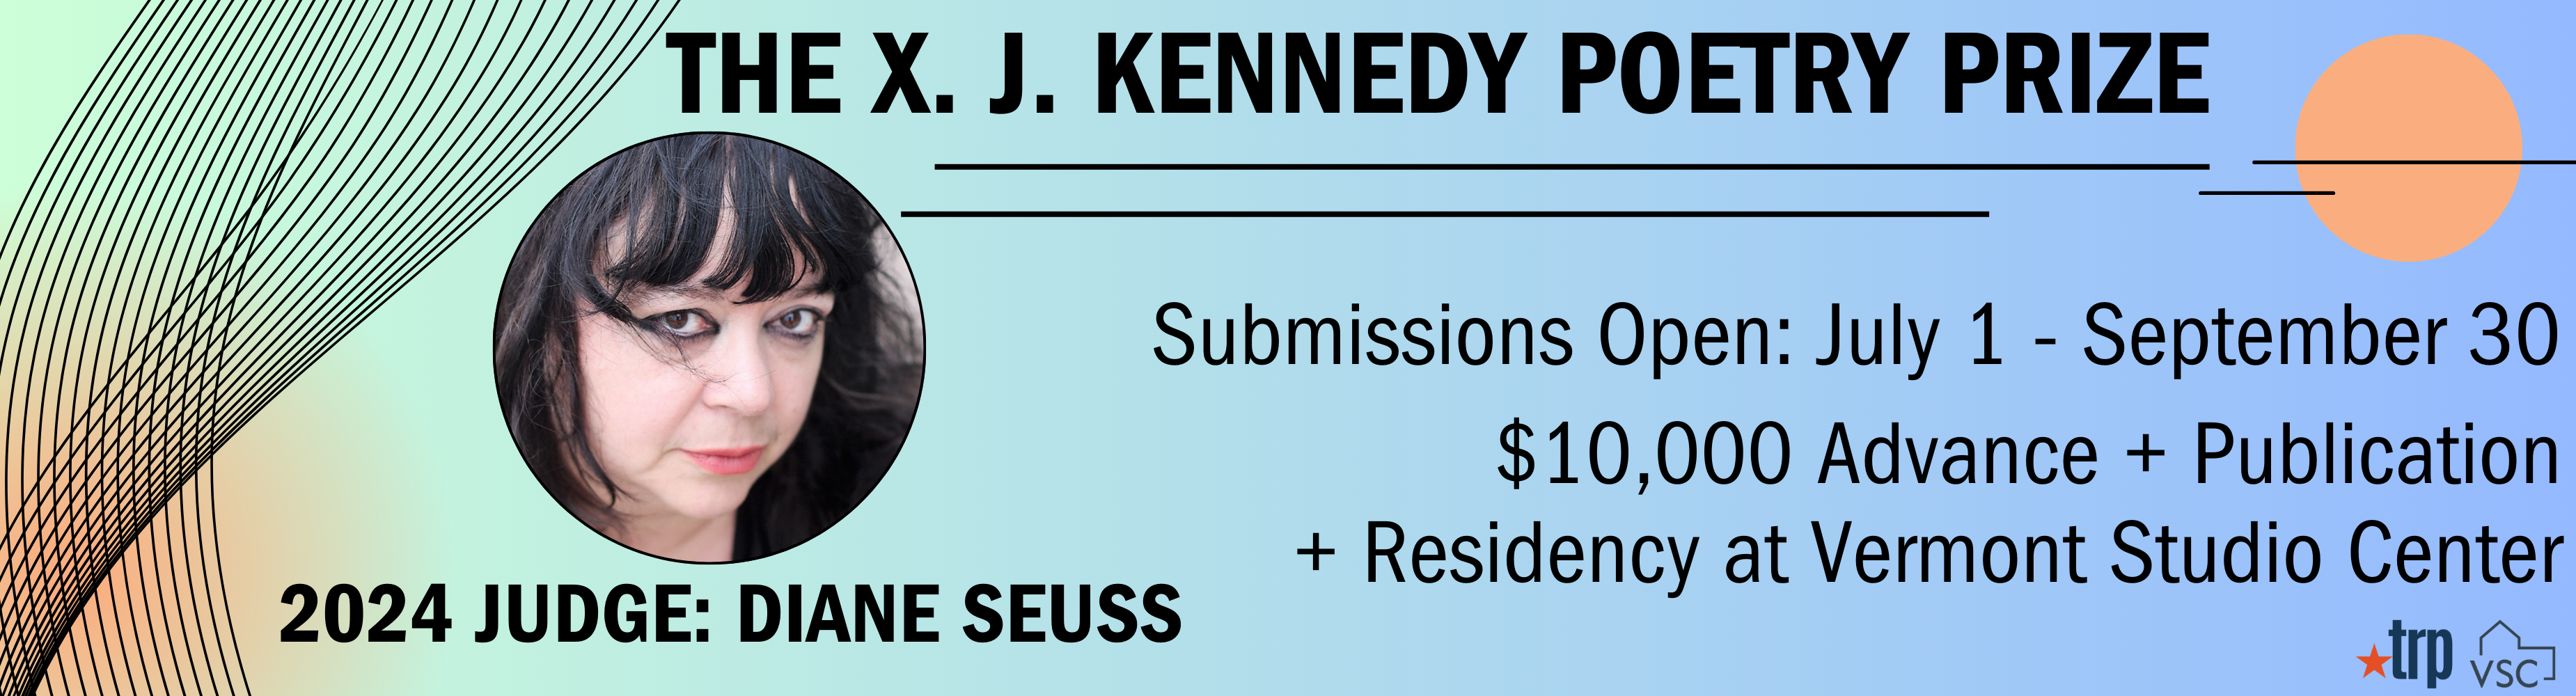 The X. J. Kennedy Poetry Prize | 2024 judge: Diane Seuss | Submissions Open: July 1 - September 30 | $10,000 Advance + Publication + Residency at Vermont Studio Center